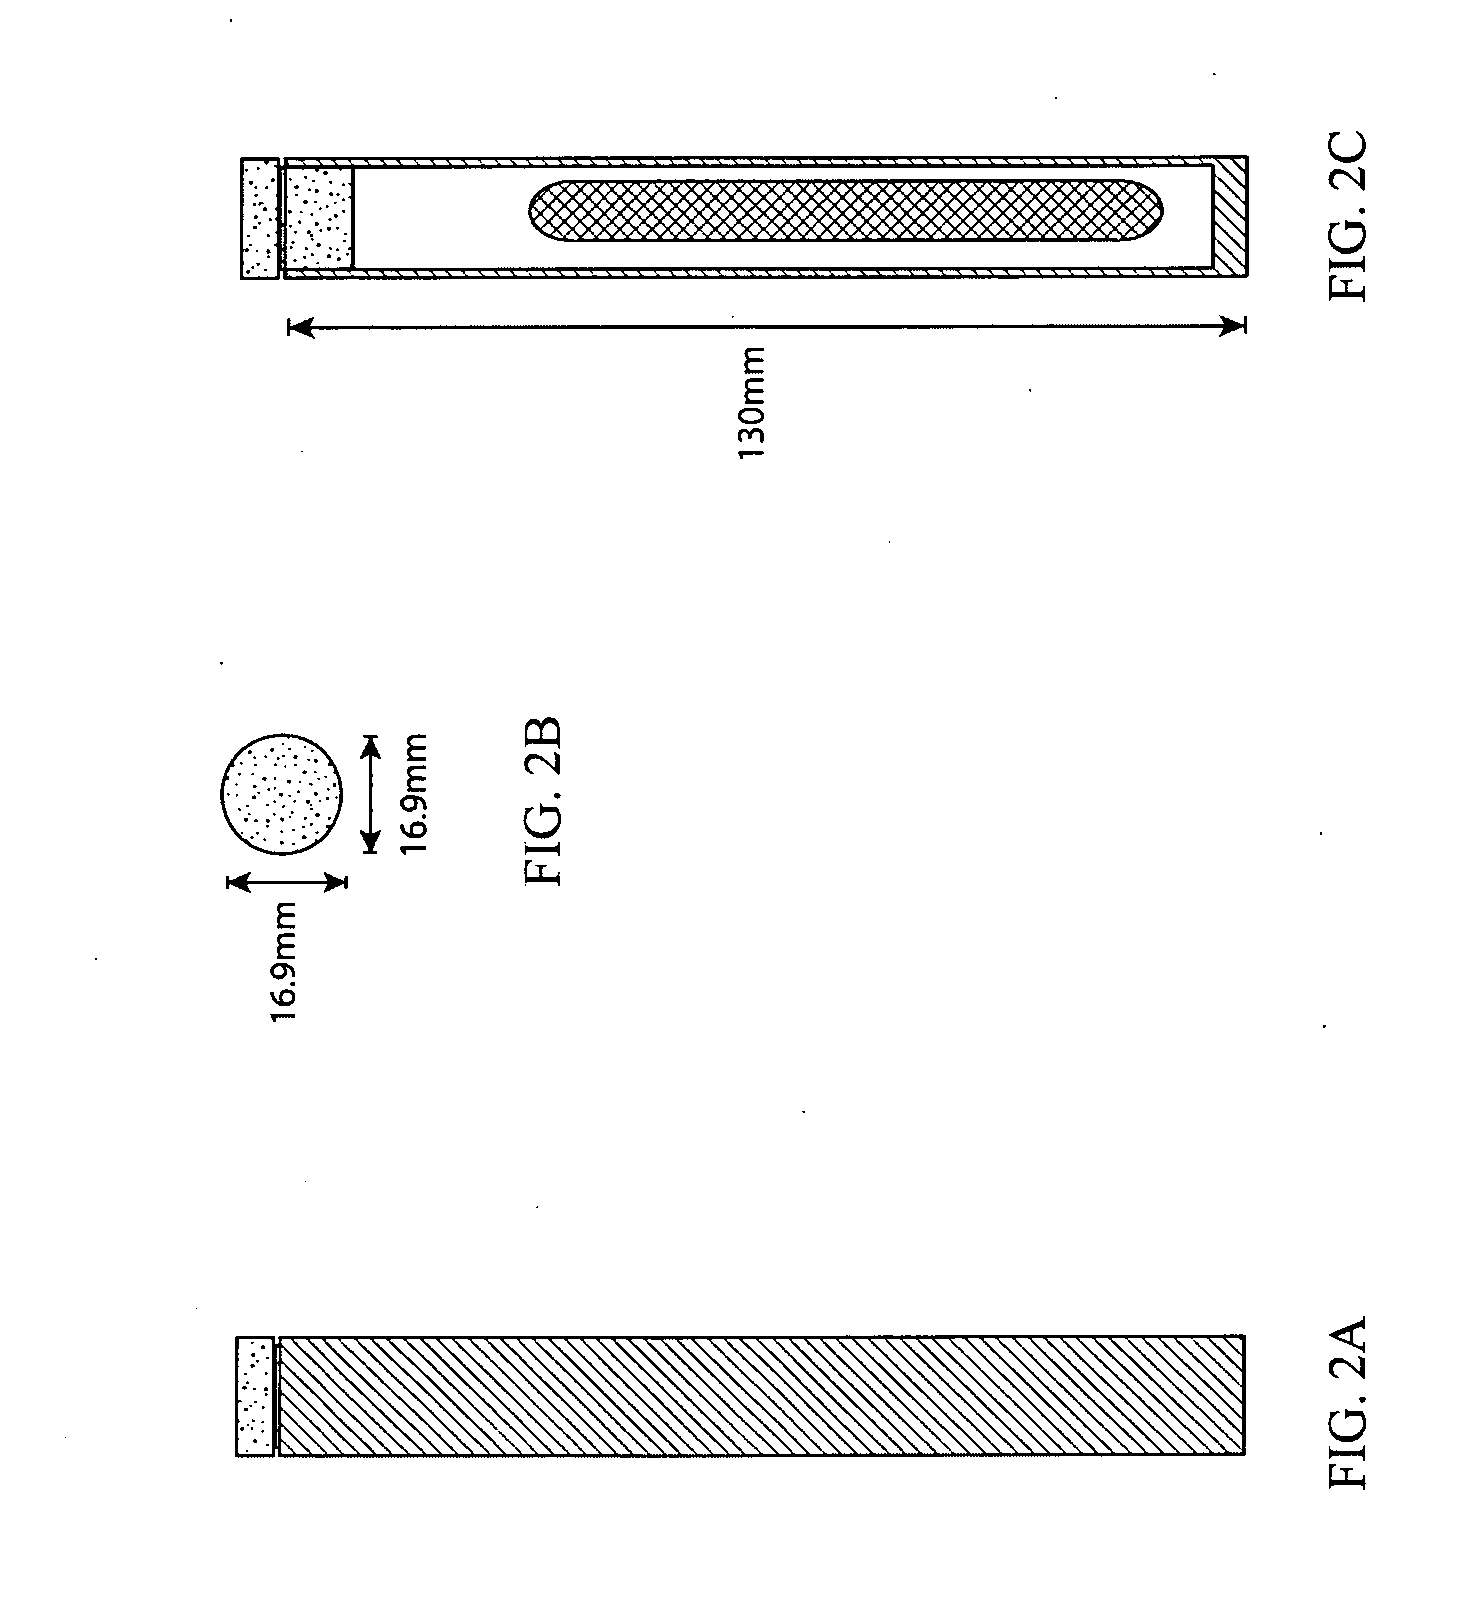 Devices, systems and methods for the collection, stimulation, stabilization, and analysis of a biological sample